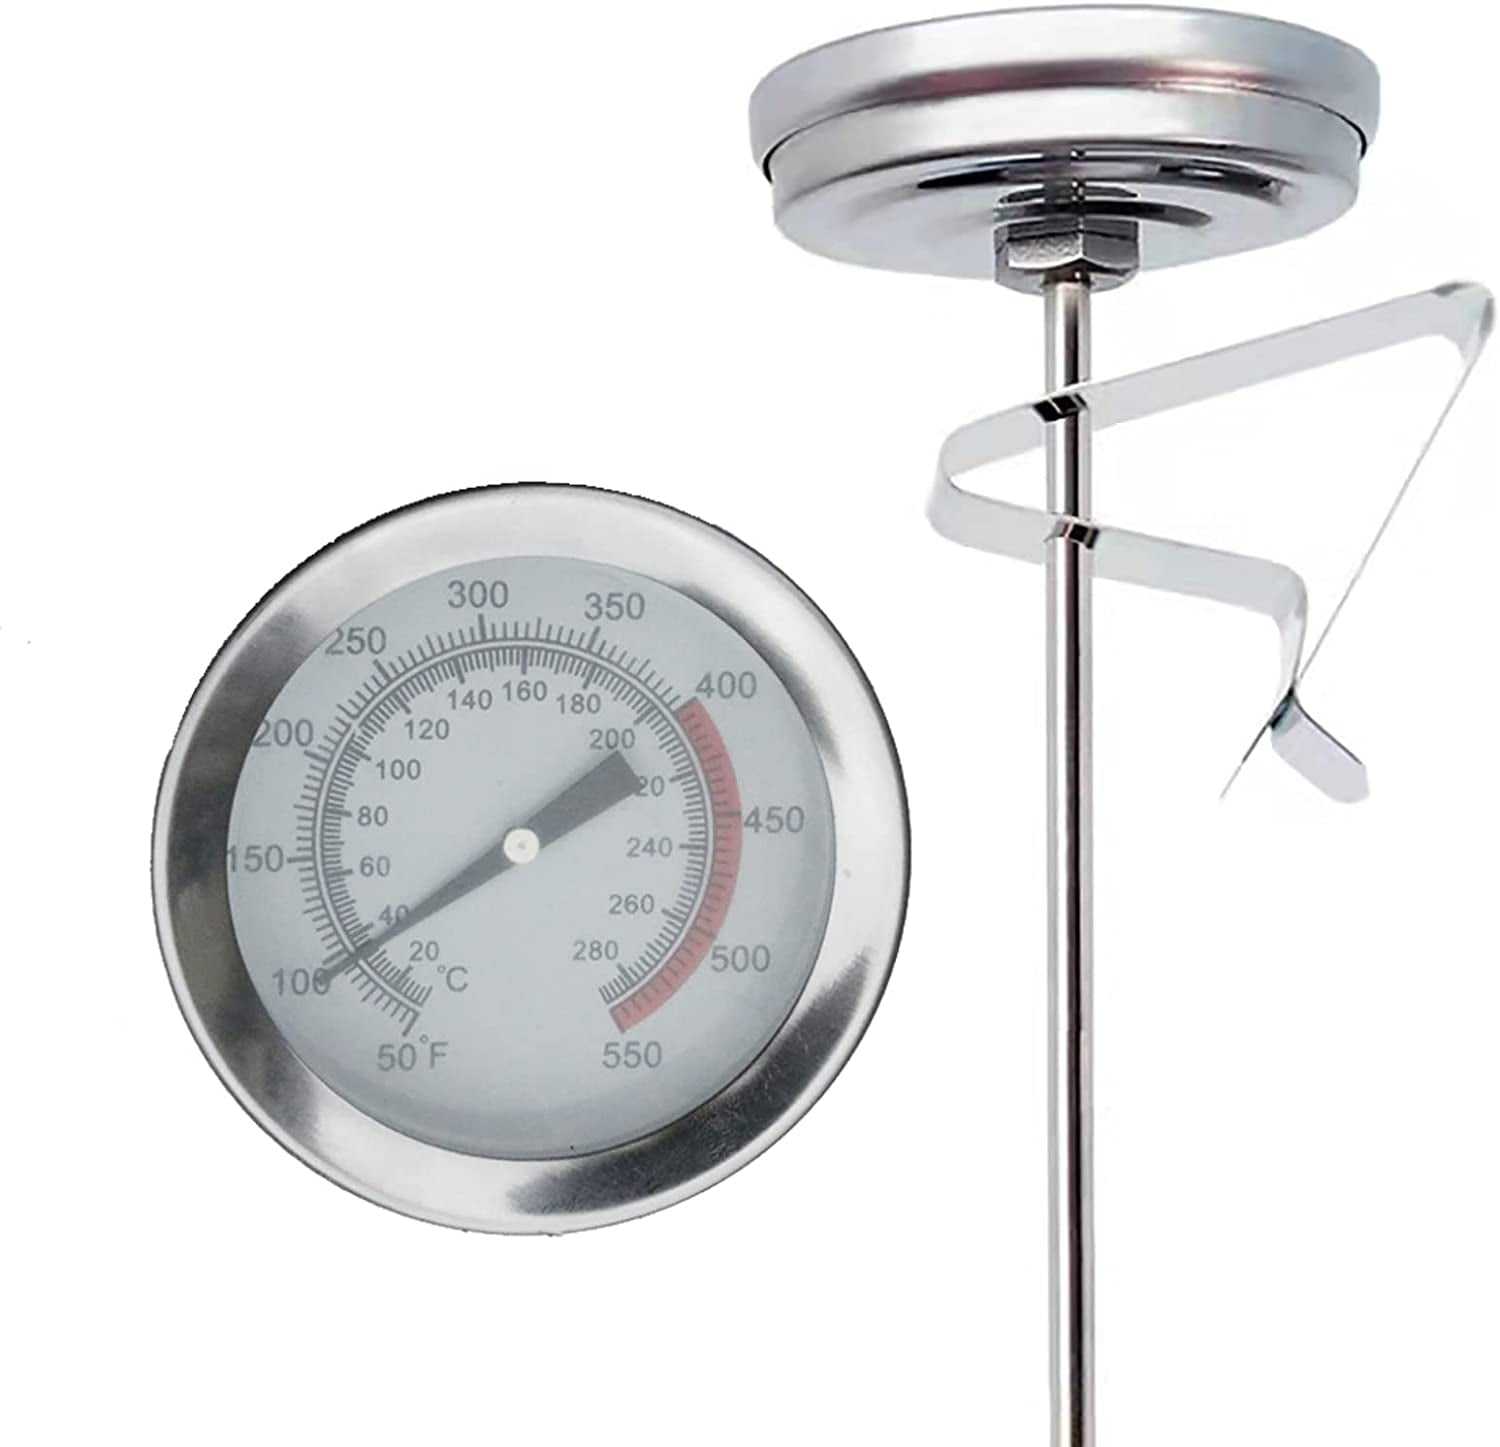  KT THERMO Candy/Deep Fry Thermometer with Instant Read,Oil  Thermometer,8 Stainless Steel Stem Meat Cooking Thermometer,Best for  Turkey,BBQ,Grill : Home & Kitchen